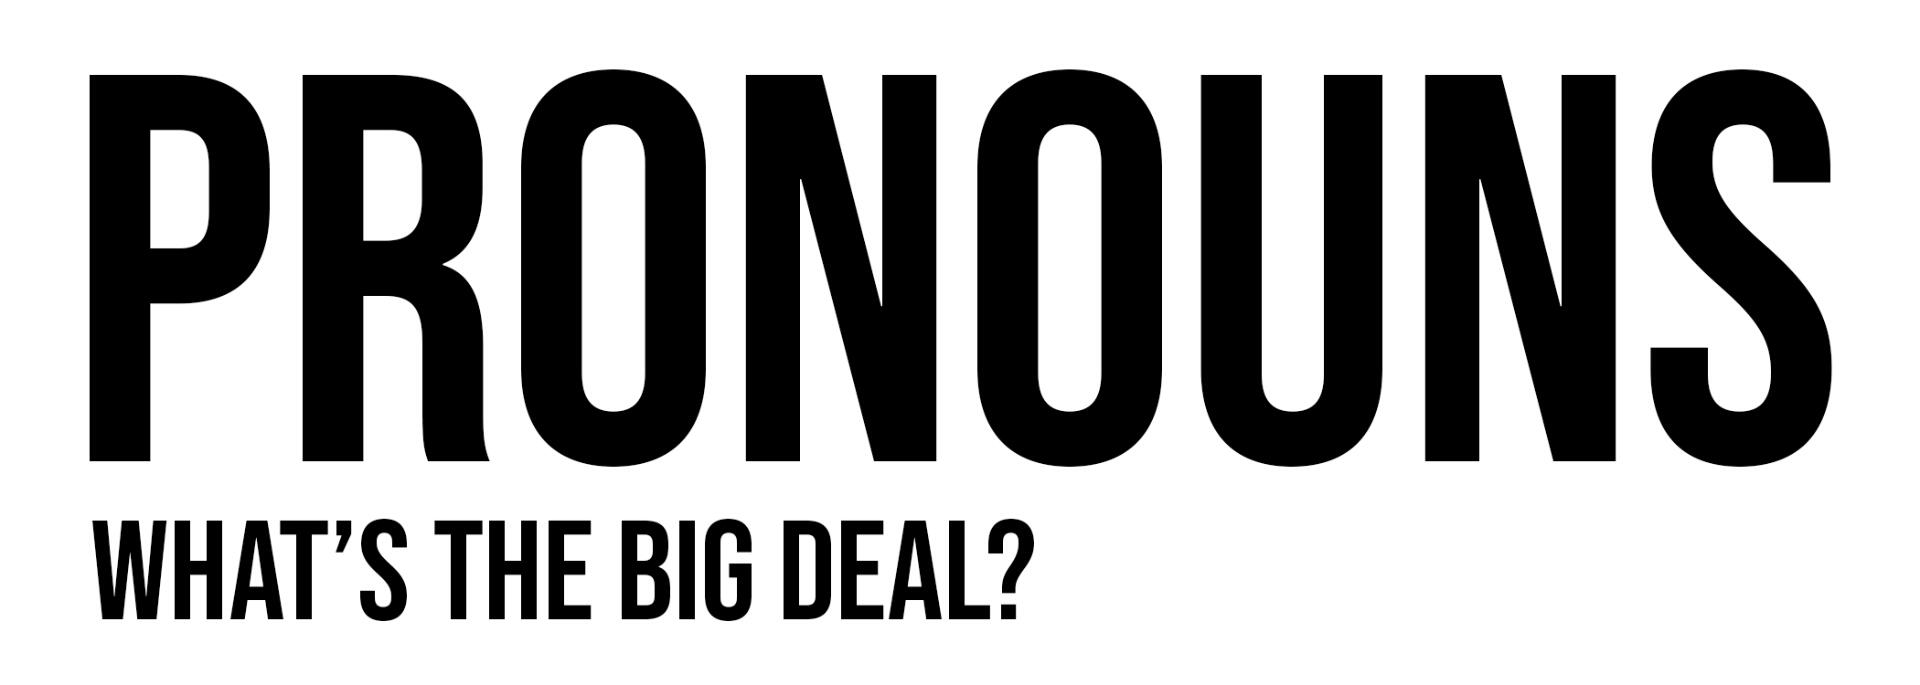 The text "Pronouns: what's the big deal?" as it appears on the title page of the Pronoun Zine.